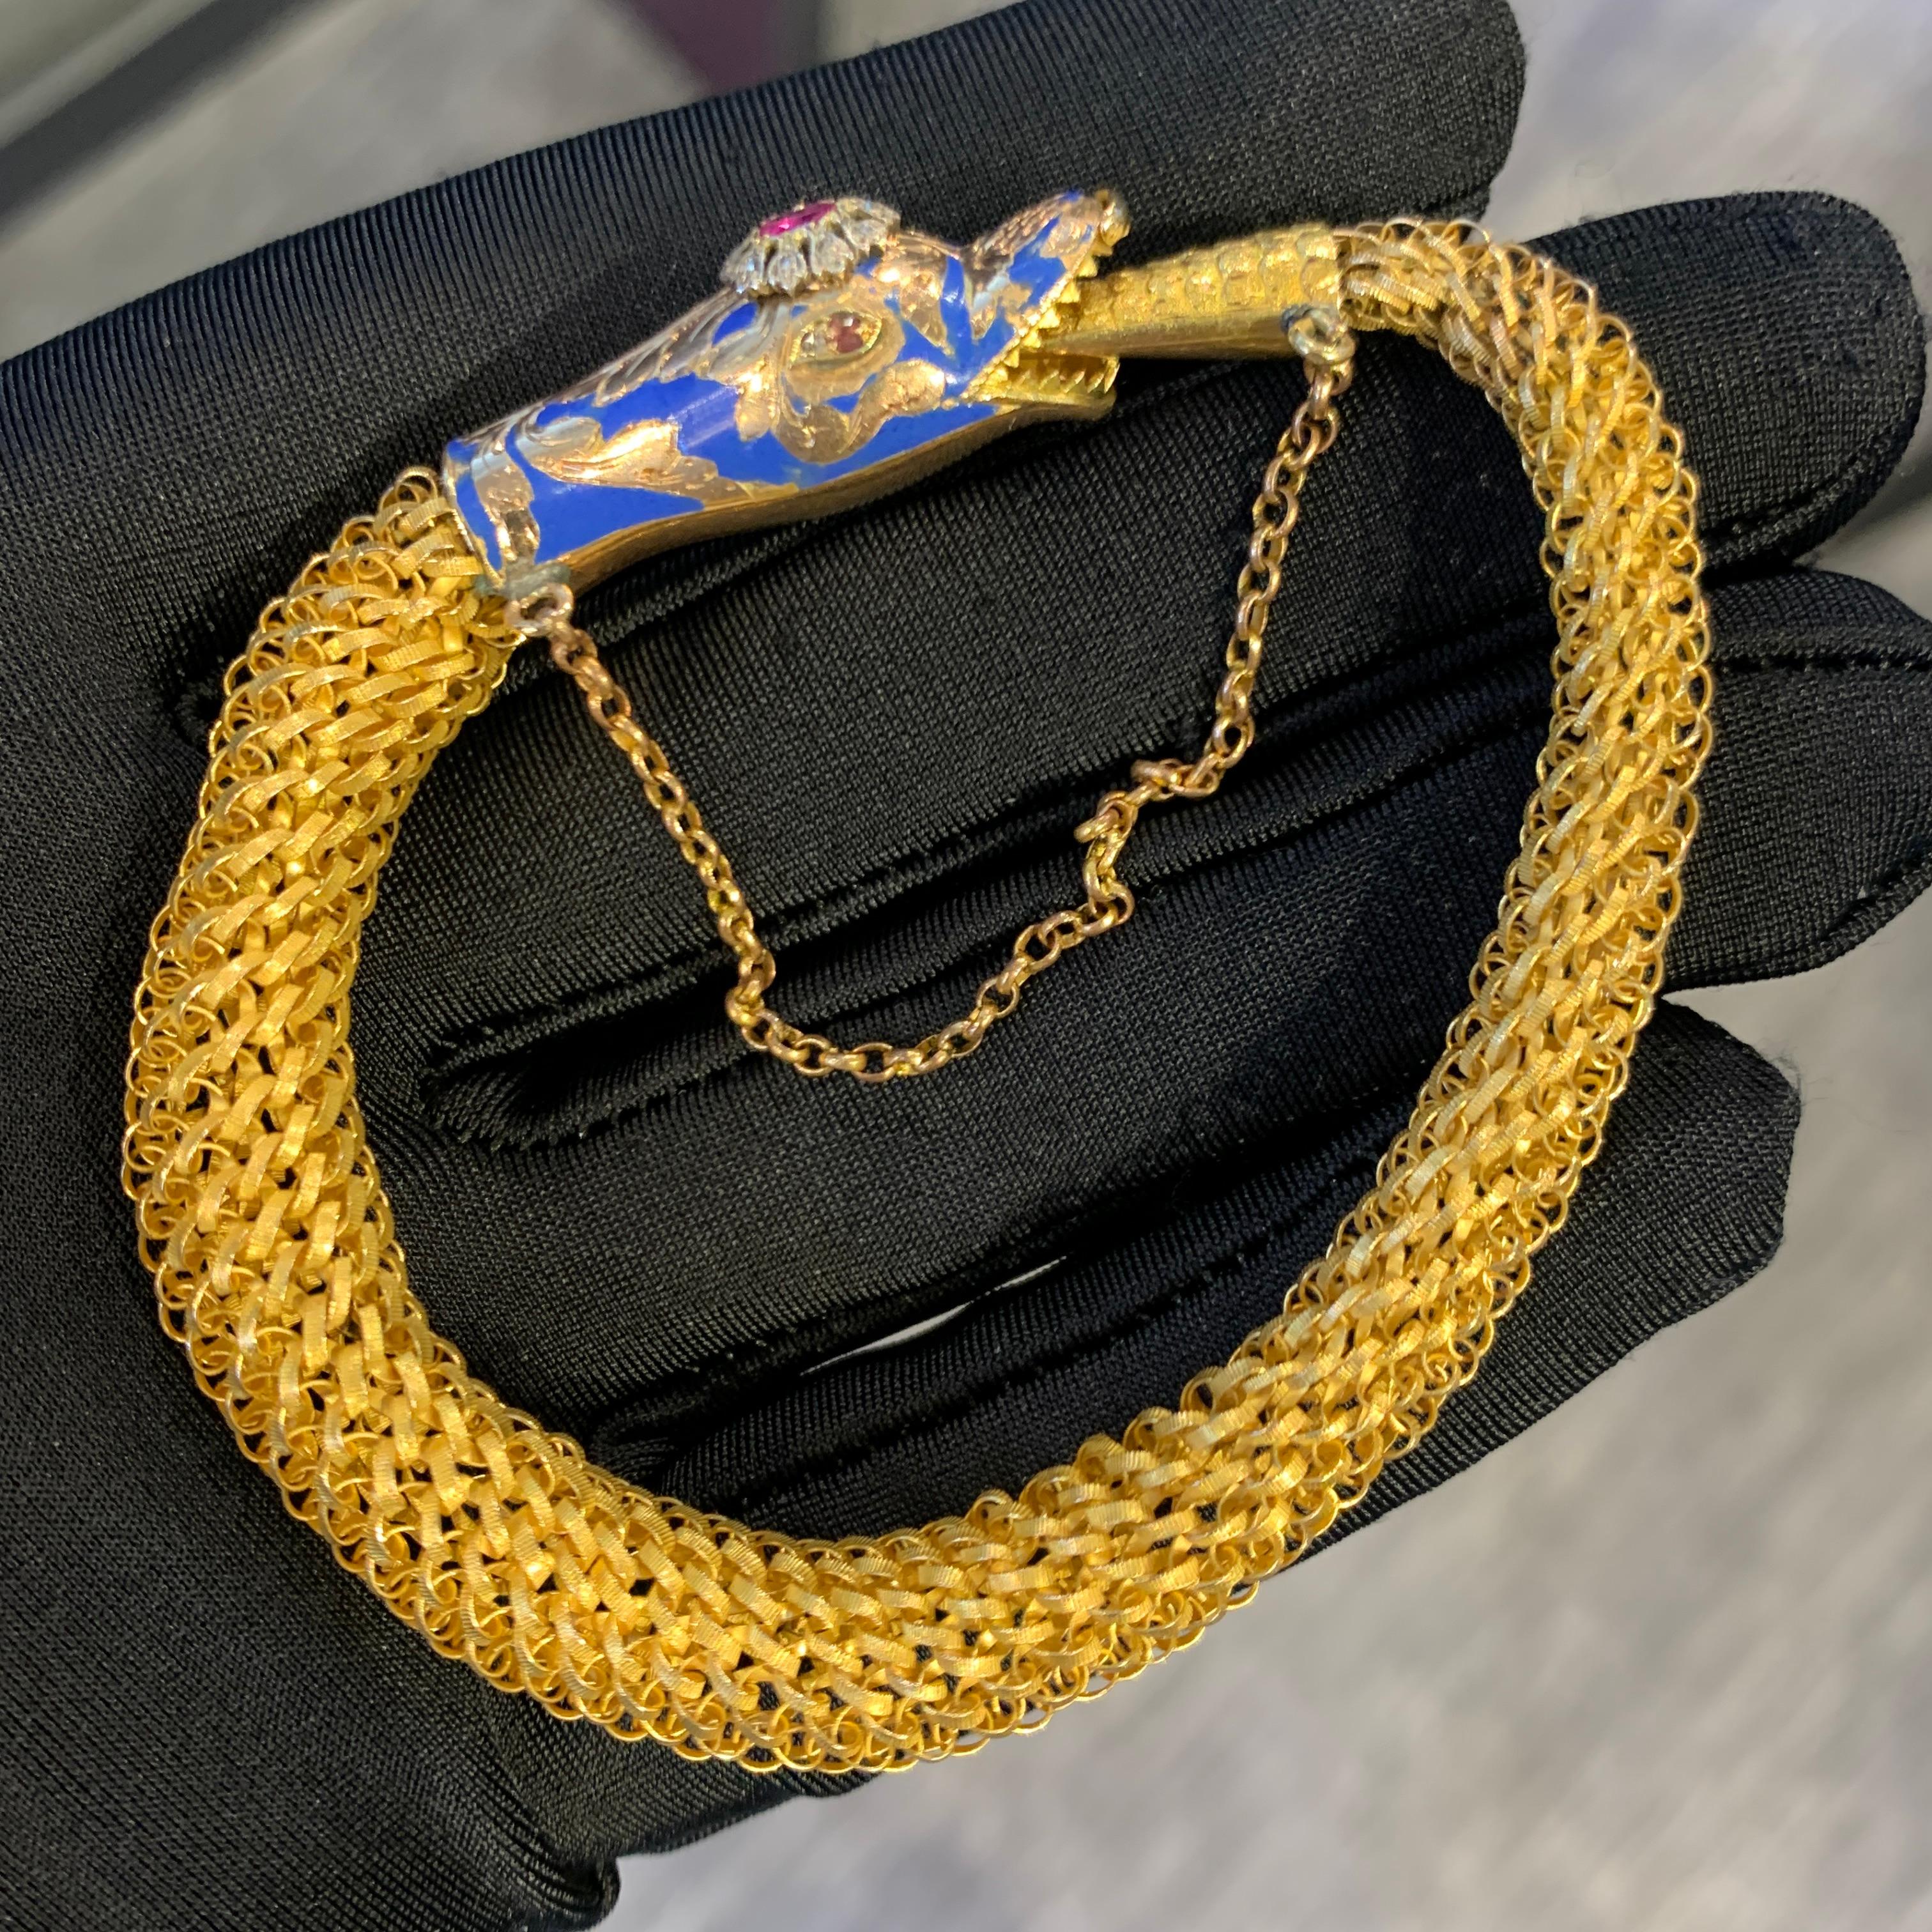 Antique Snake Bracelet

A 14 karat gold mesh bracelet featuring a serpent's head and tail clasp. The snake head is set with blue enamel, diamonds and an oval shaped ruby, while the eyes are each set with a diamond and an amethyst.

The Ouroboros